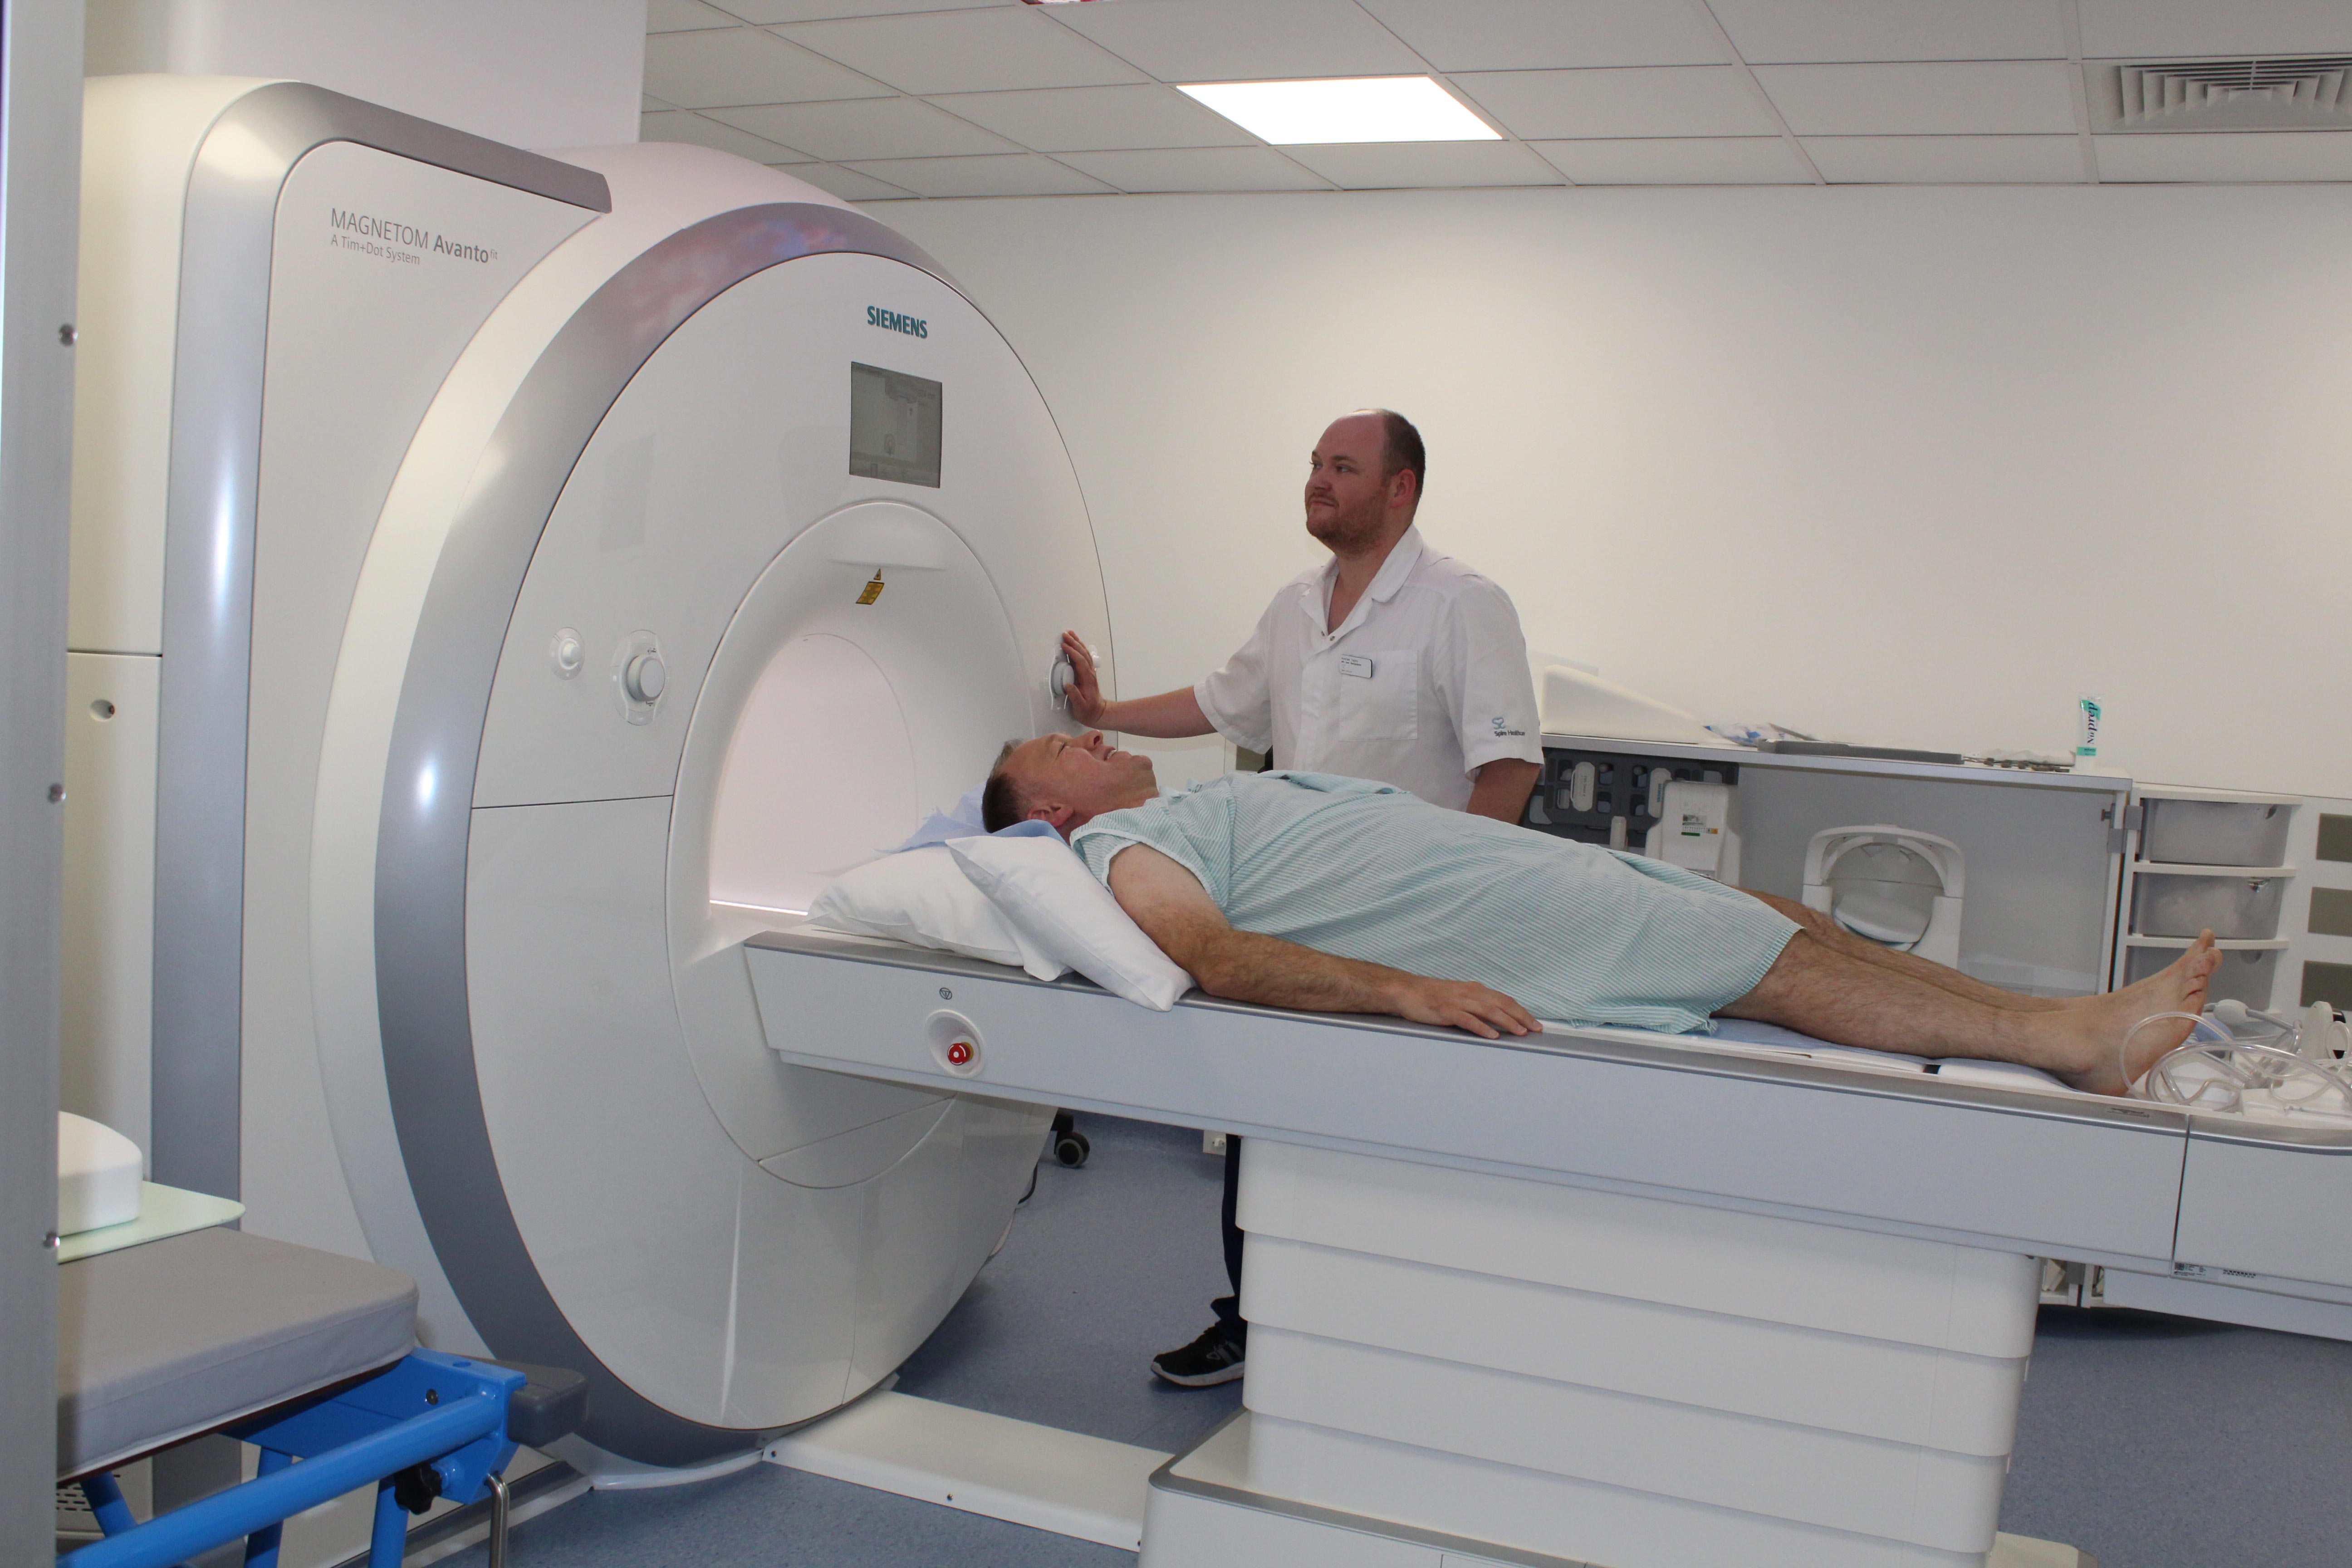 What to expect from an MRI scan